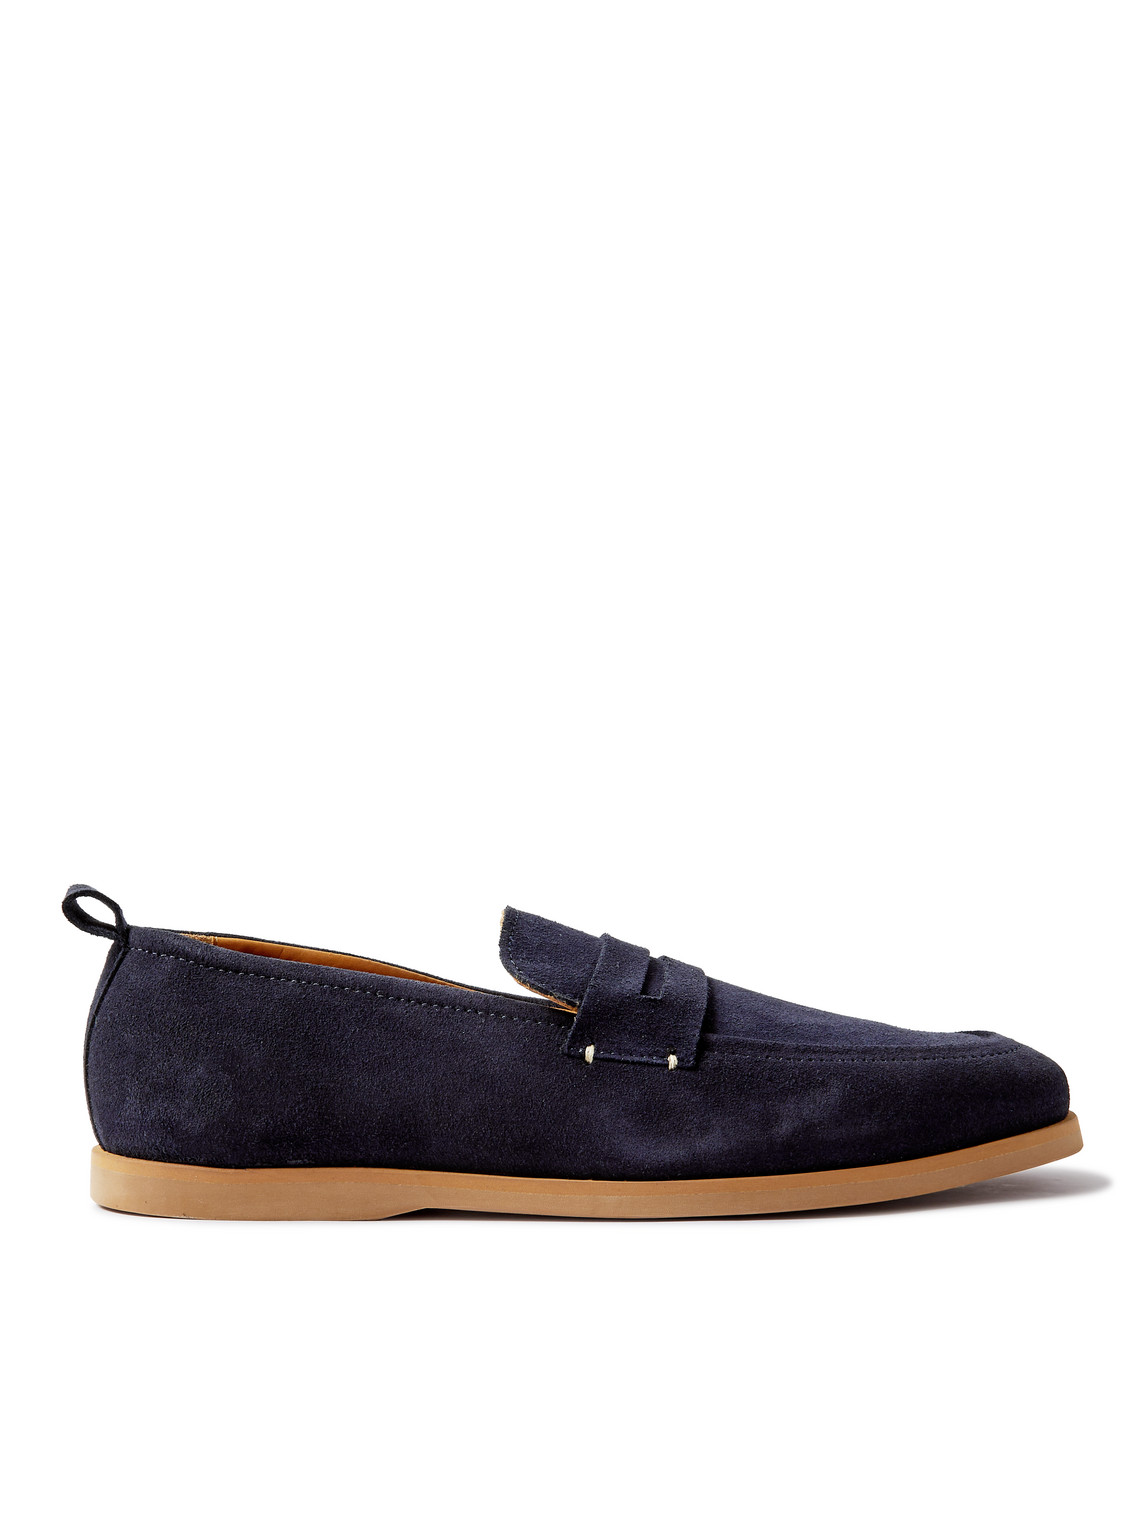 Mr P. Regenerated Suede By Evolo® Penny Loafers In Blue